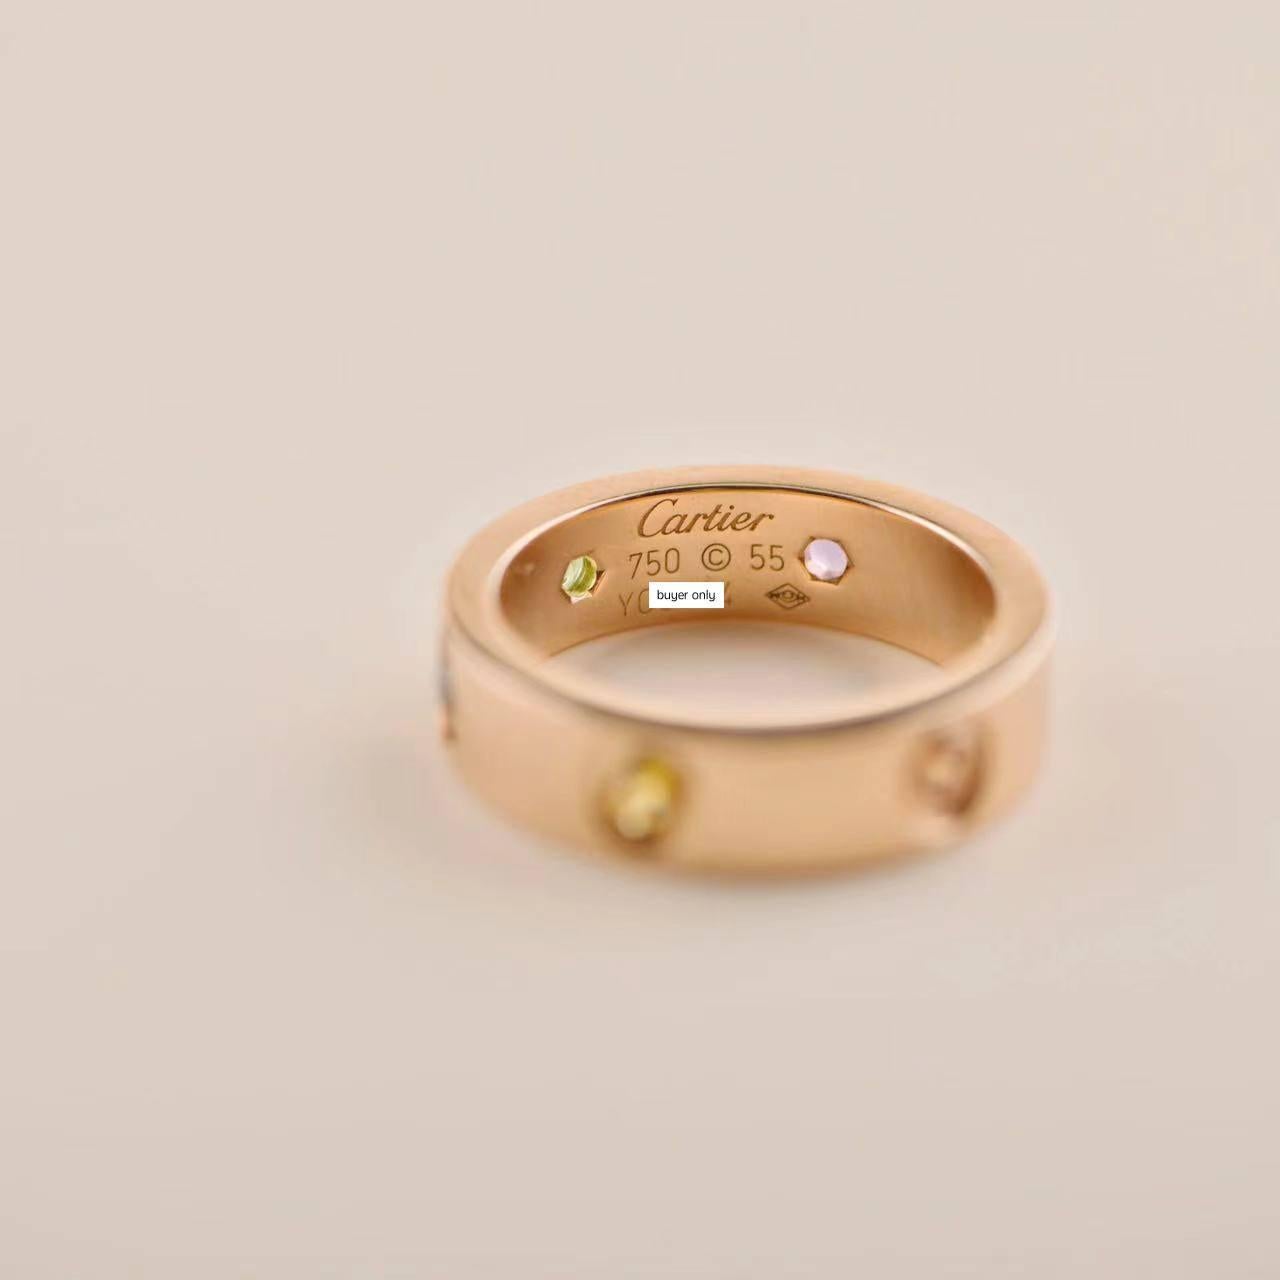 Cartier Love Rainbow Multigem Rose Gold Ring Size 55 For Sale 1